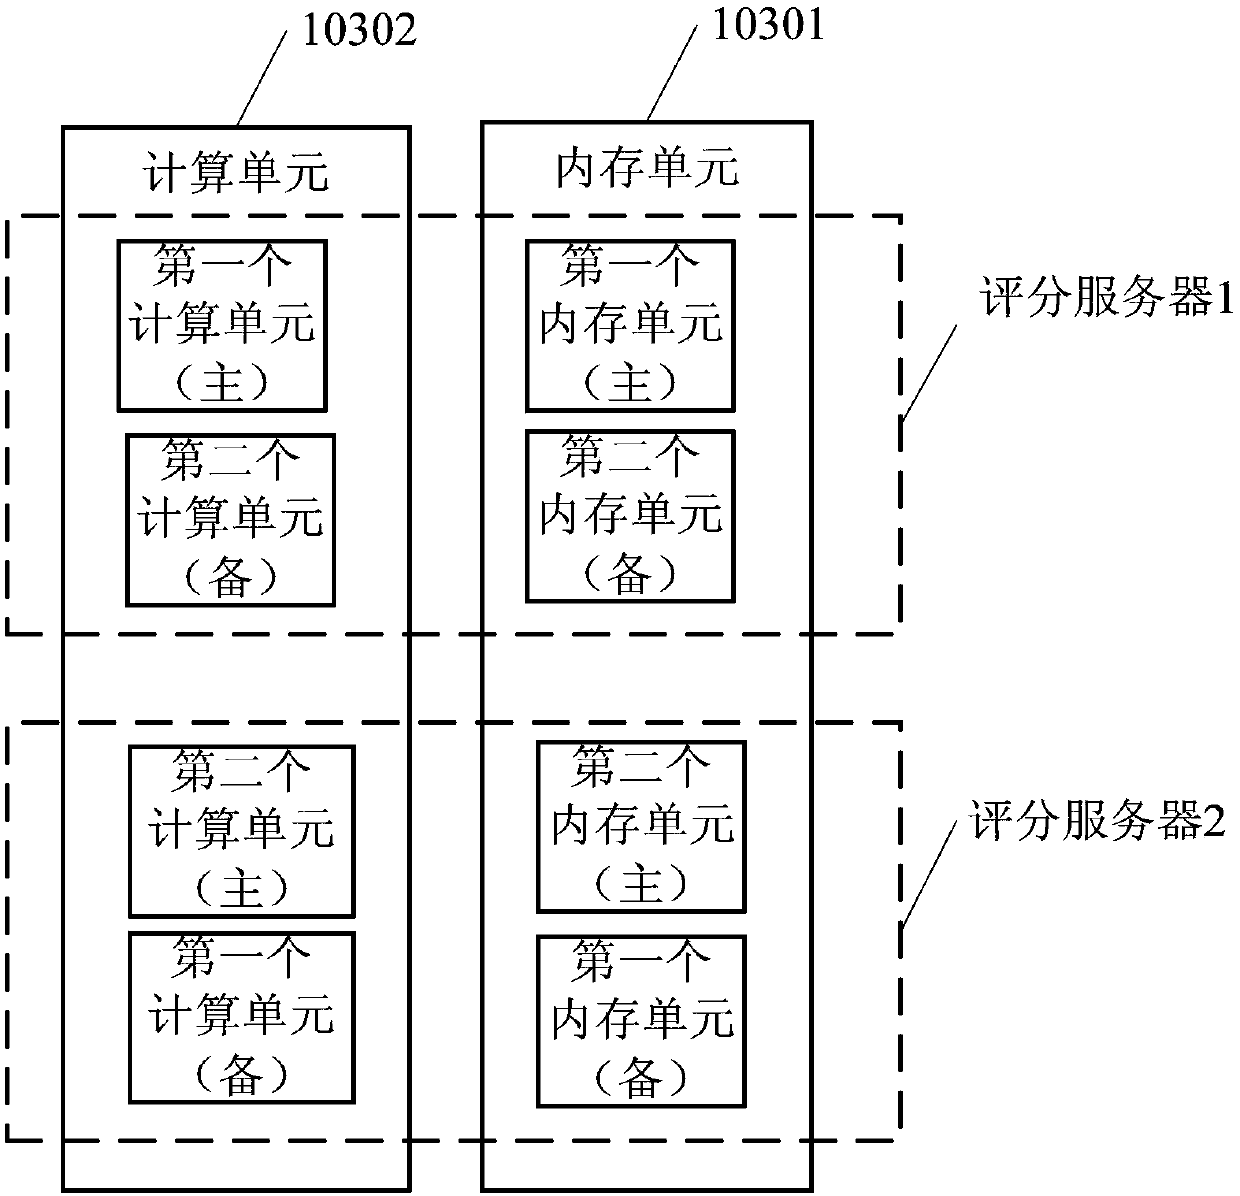 Distributed data processing system and method